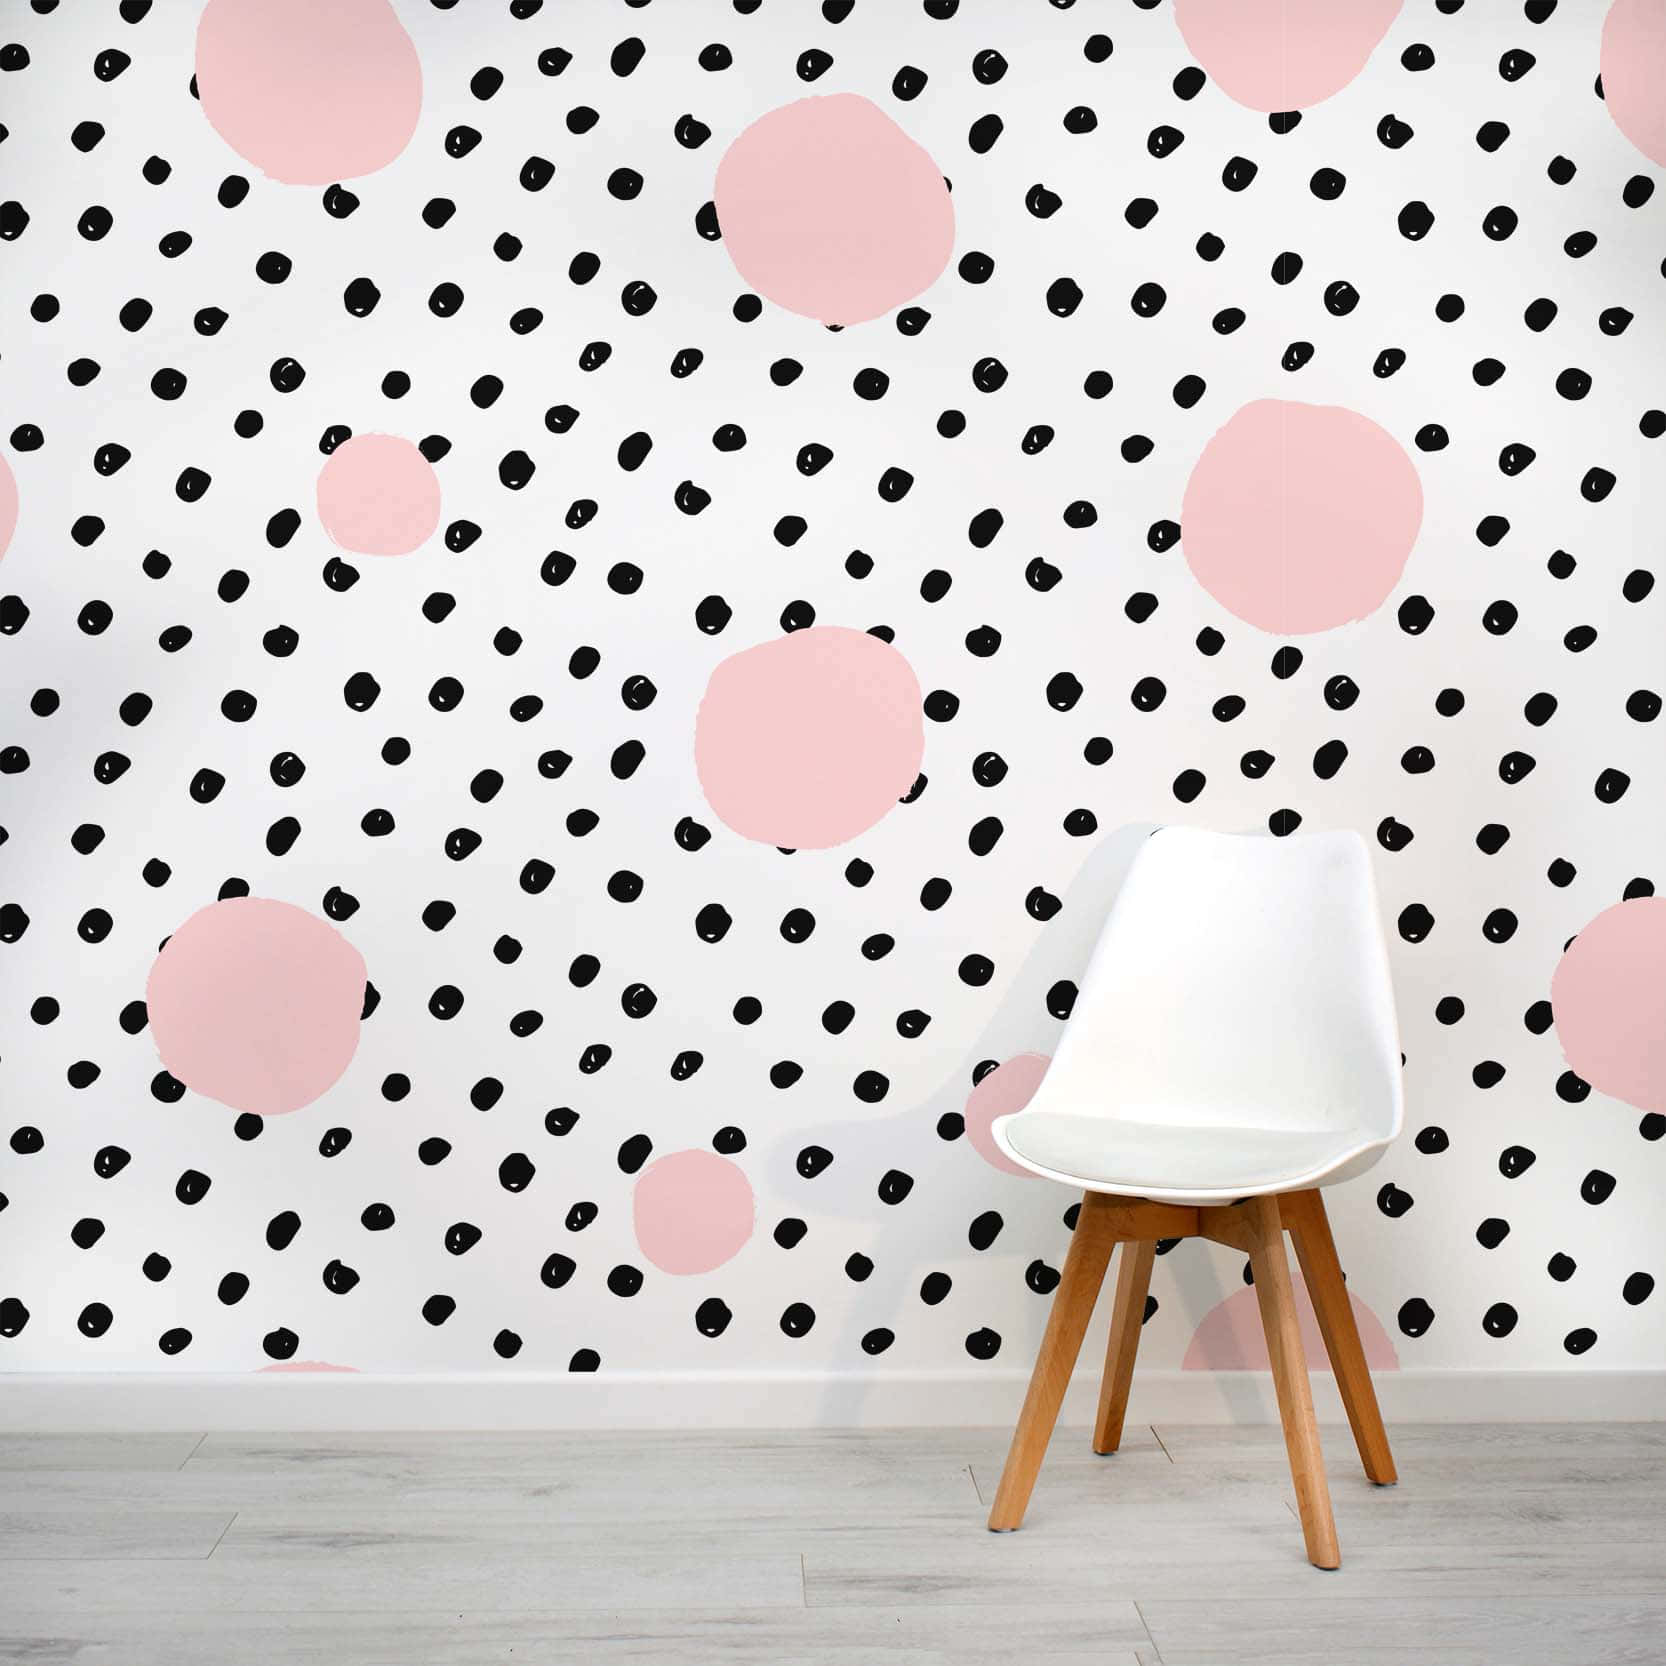 A pink and white pattern of polka dots Wallpaper